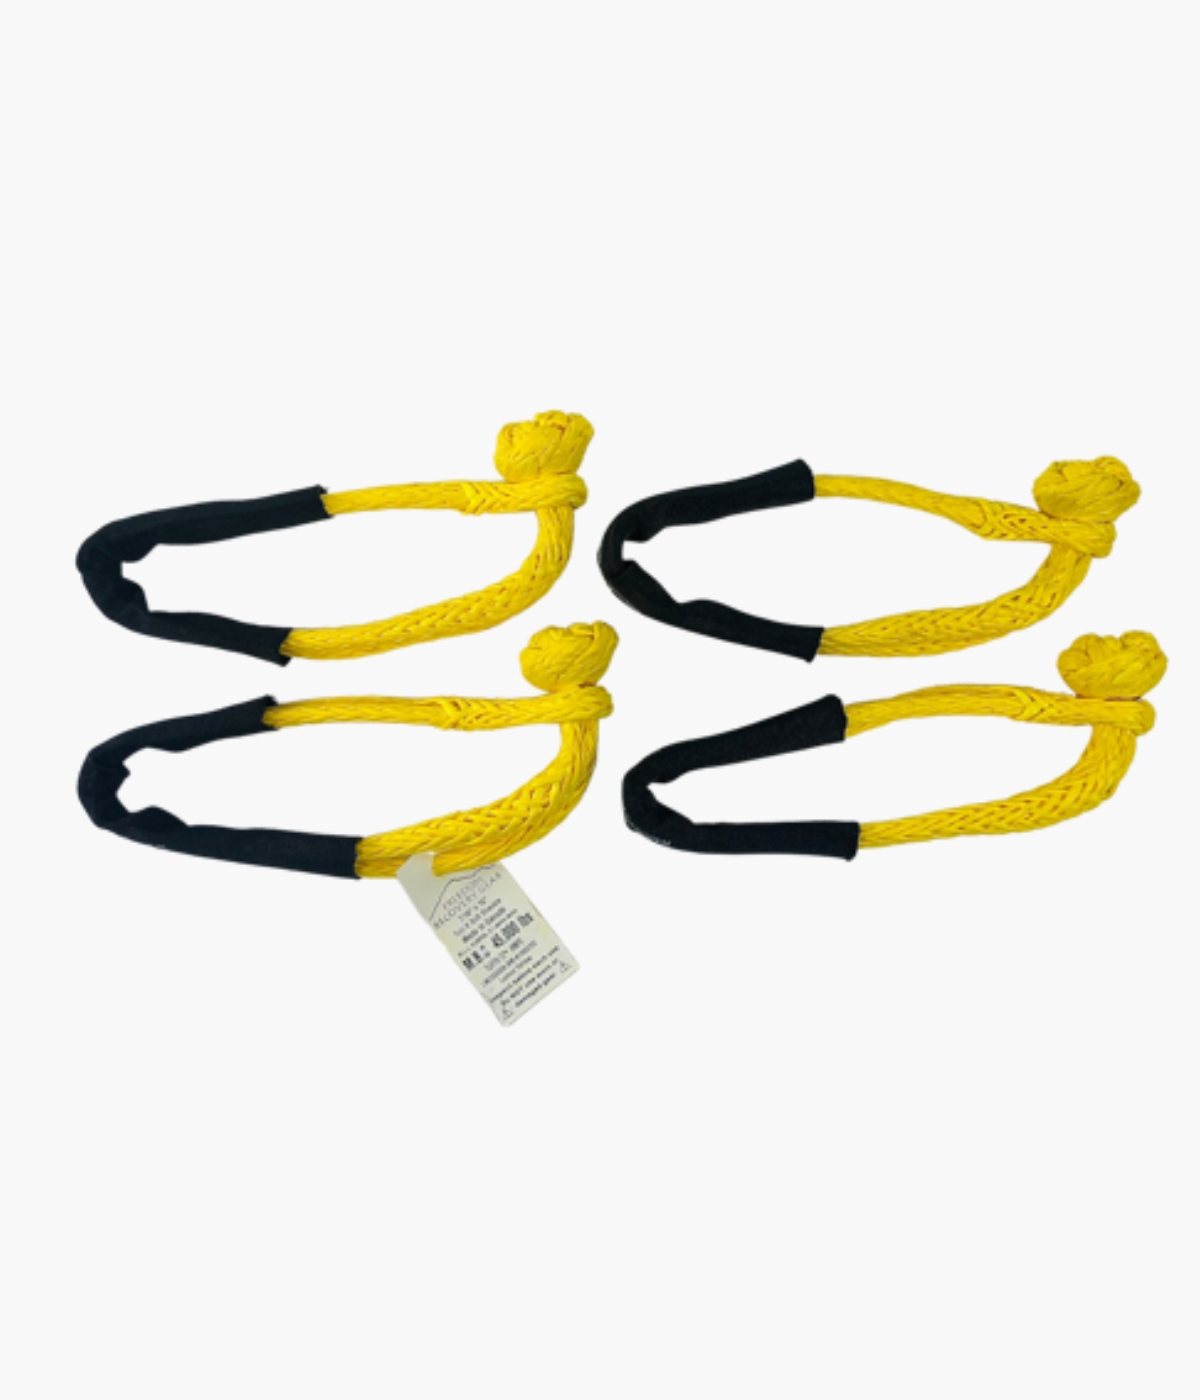 Stage 2 - 6 pc Recovery Gear Kit with KERR Rope (select required GVWR)